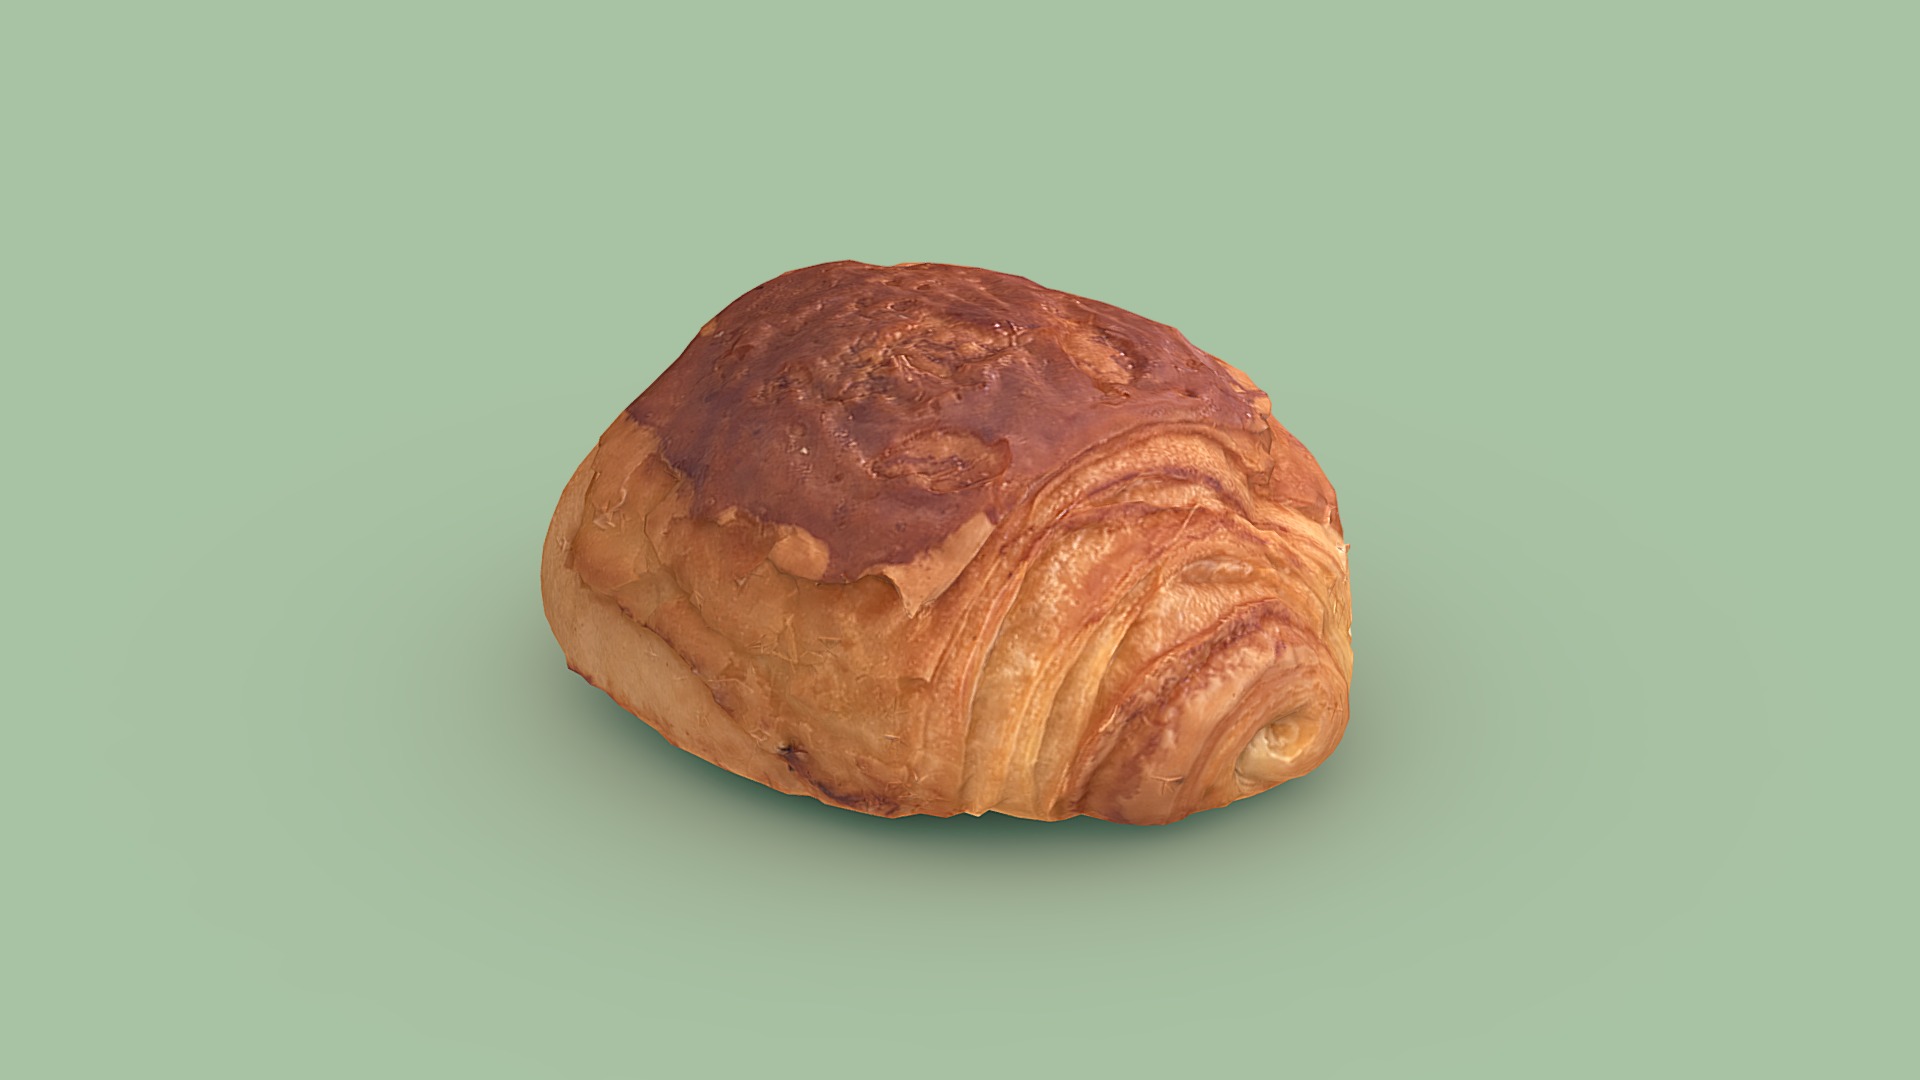 3D model PAIN AU CHOCOLAT - This is a 3D model of the PAIN AU CHOCOLAT. The 3D model is about a close up of a walnut.